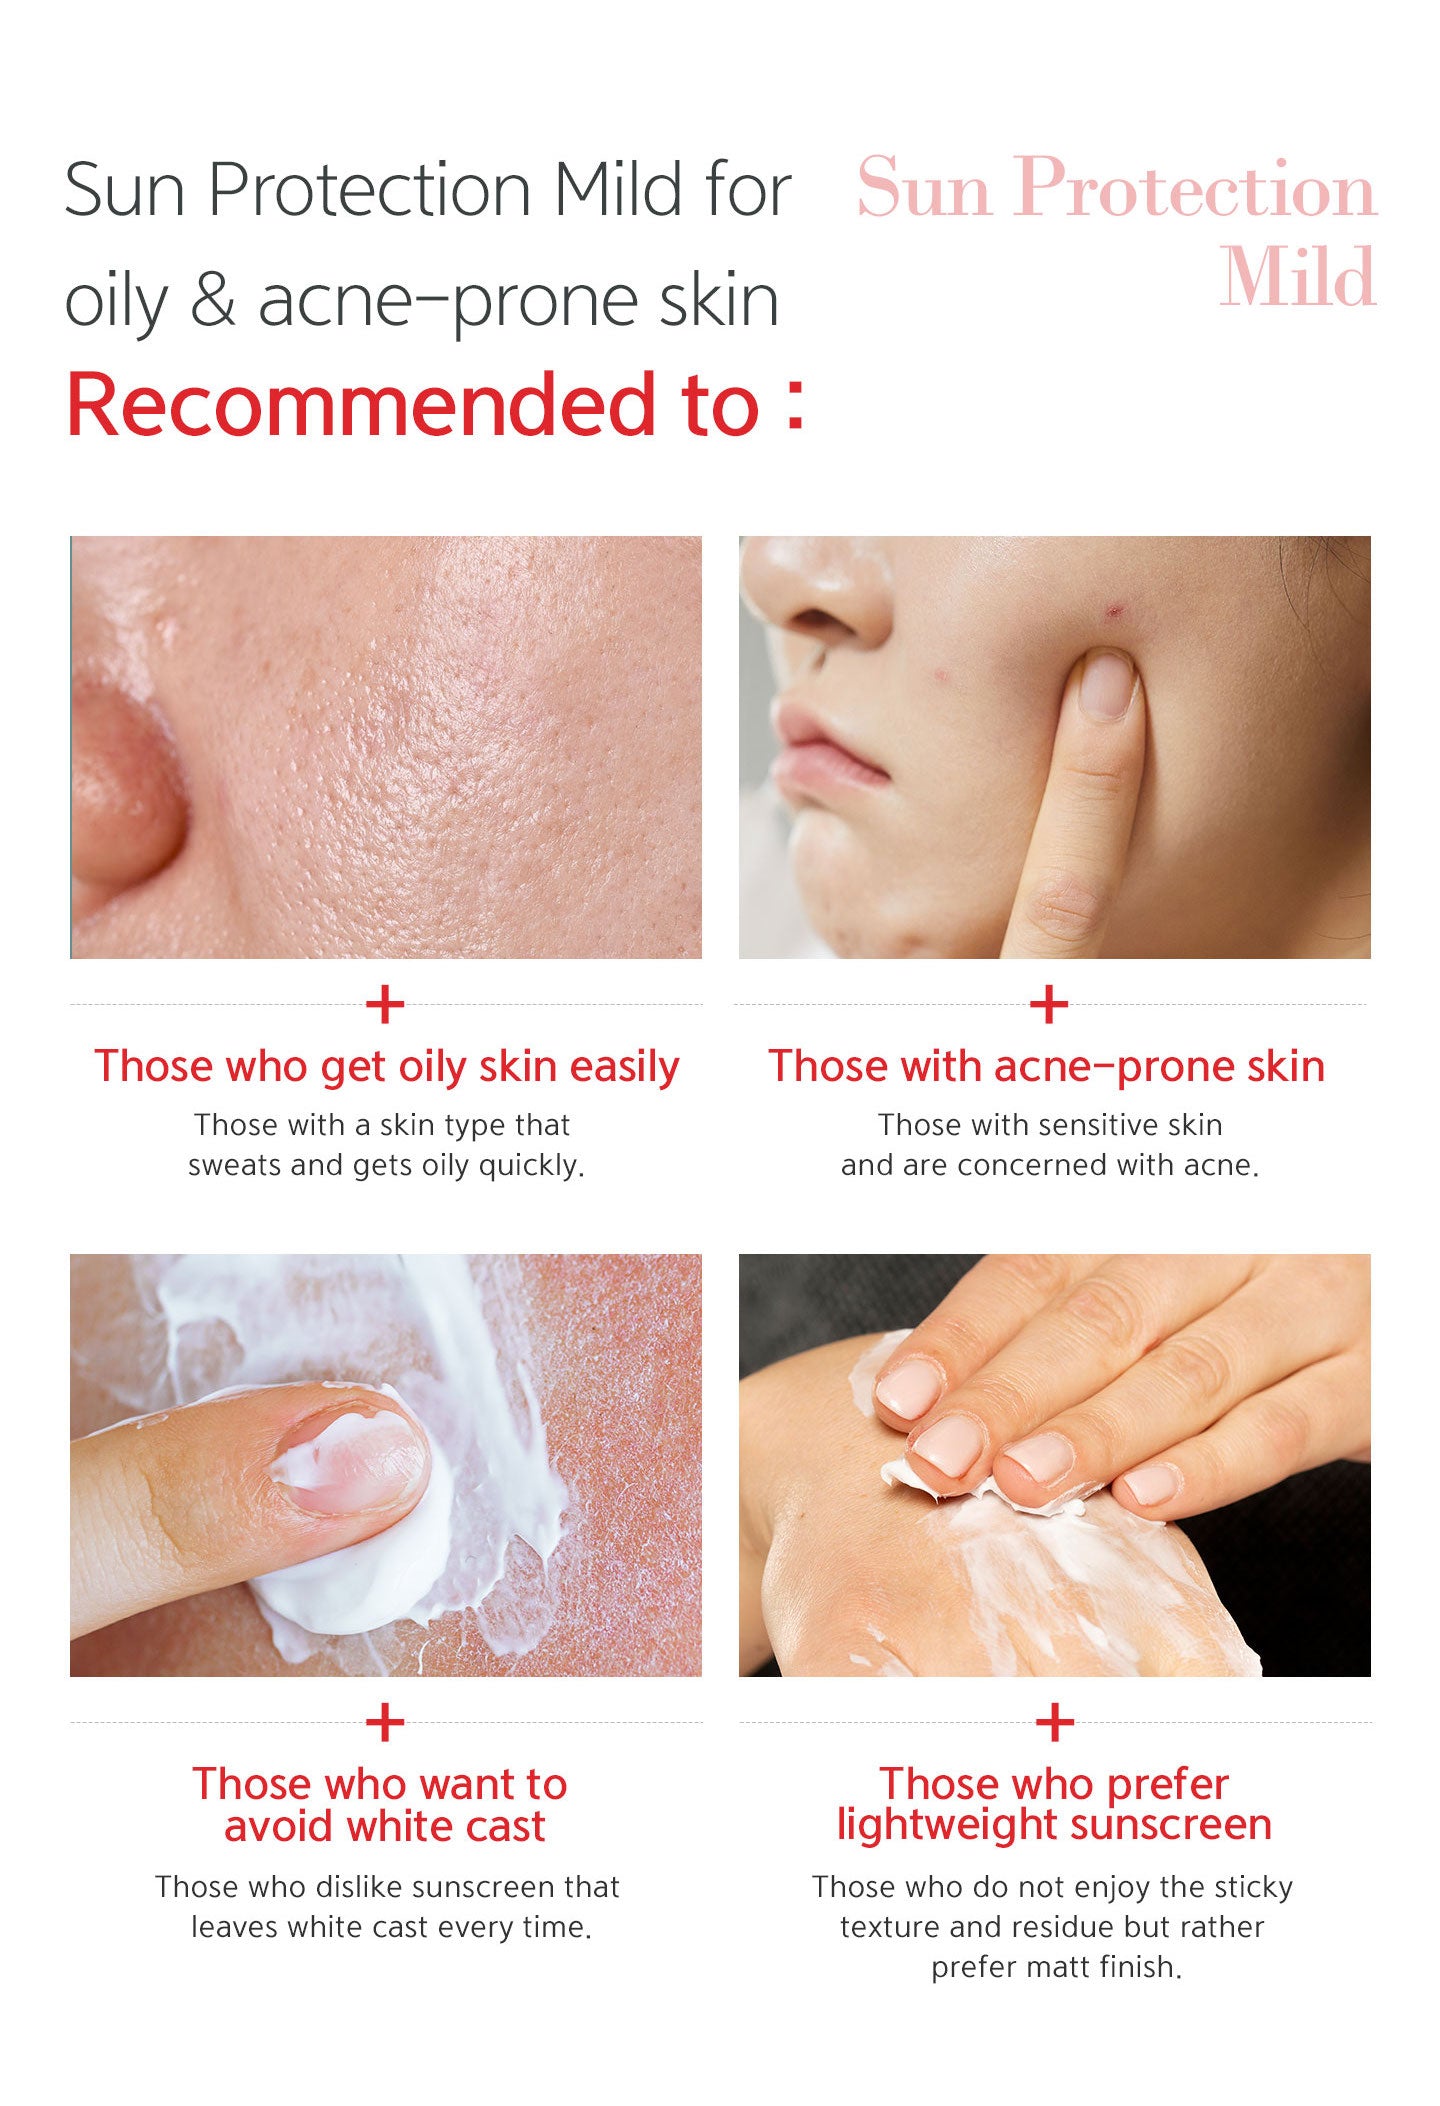 Sun protection mild recommended to those who get oily skin easily, with acne-prone skin, want to avoid white cast, prefer lightweight sunscreen. 